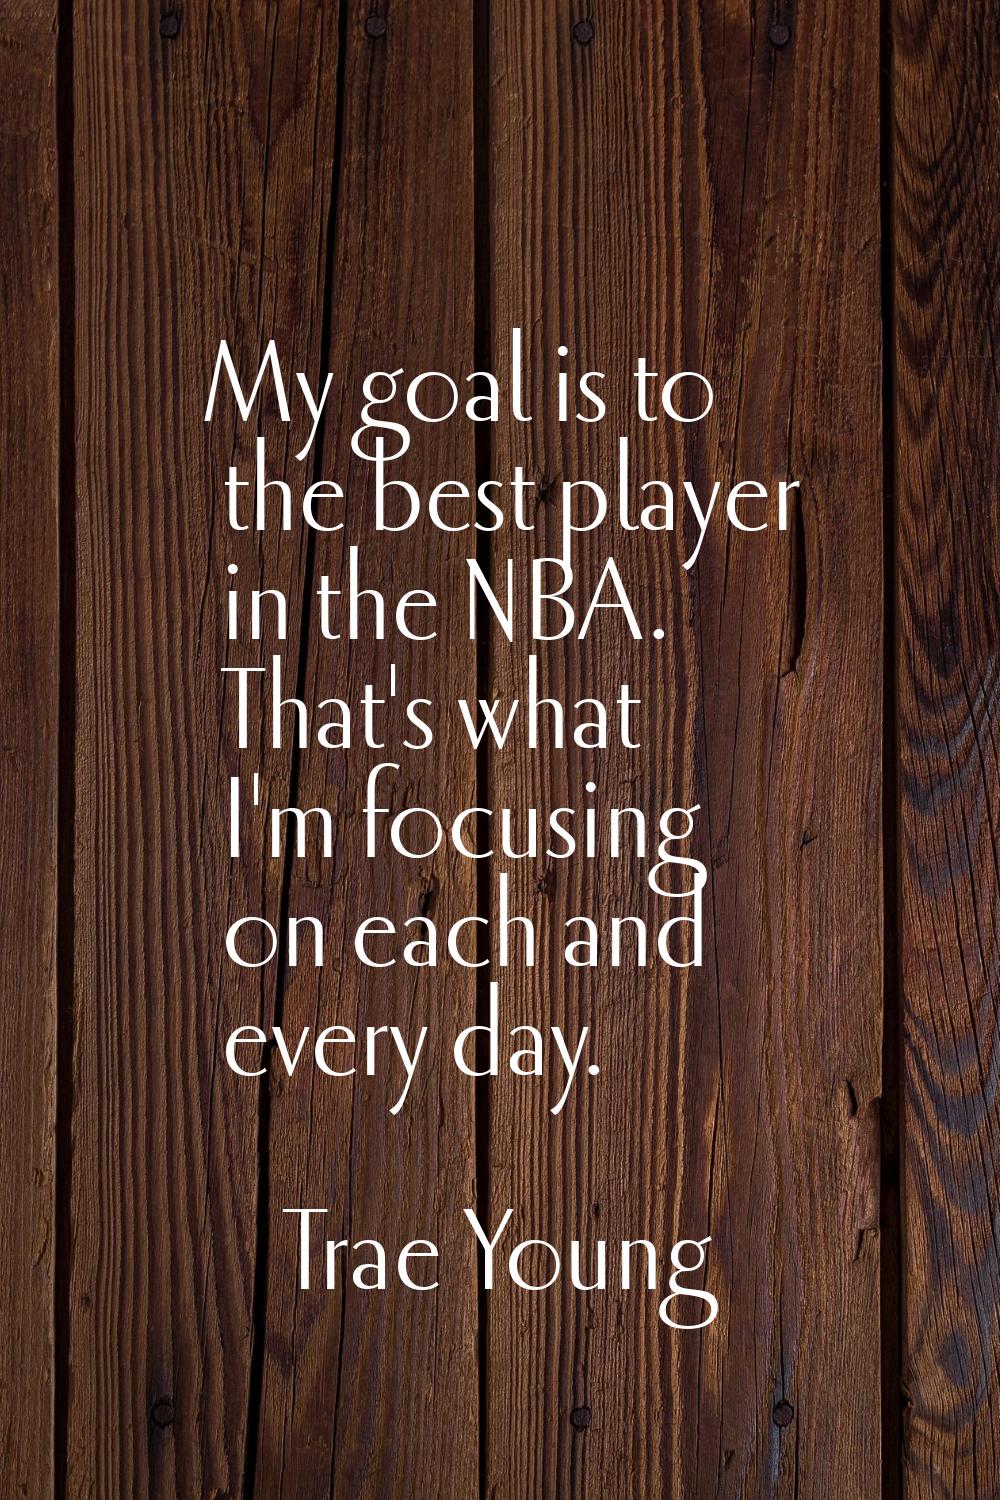 My goal is to the best player in the NBA. That's what I'm focusing on each and every day.